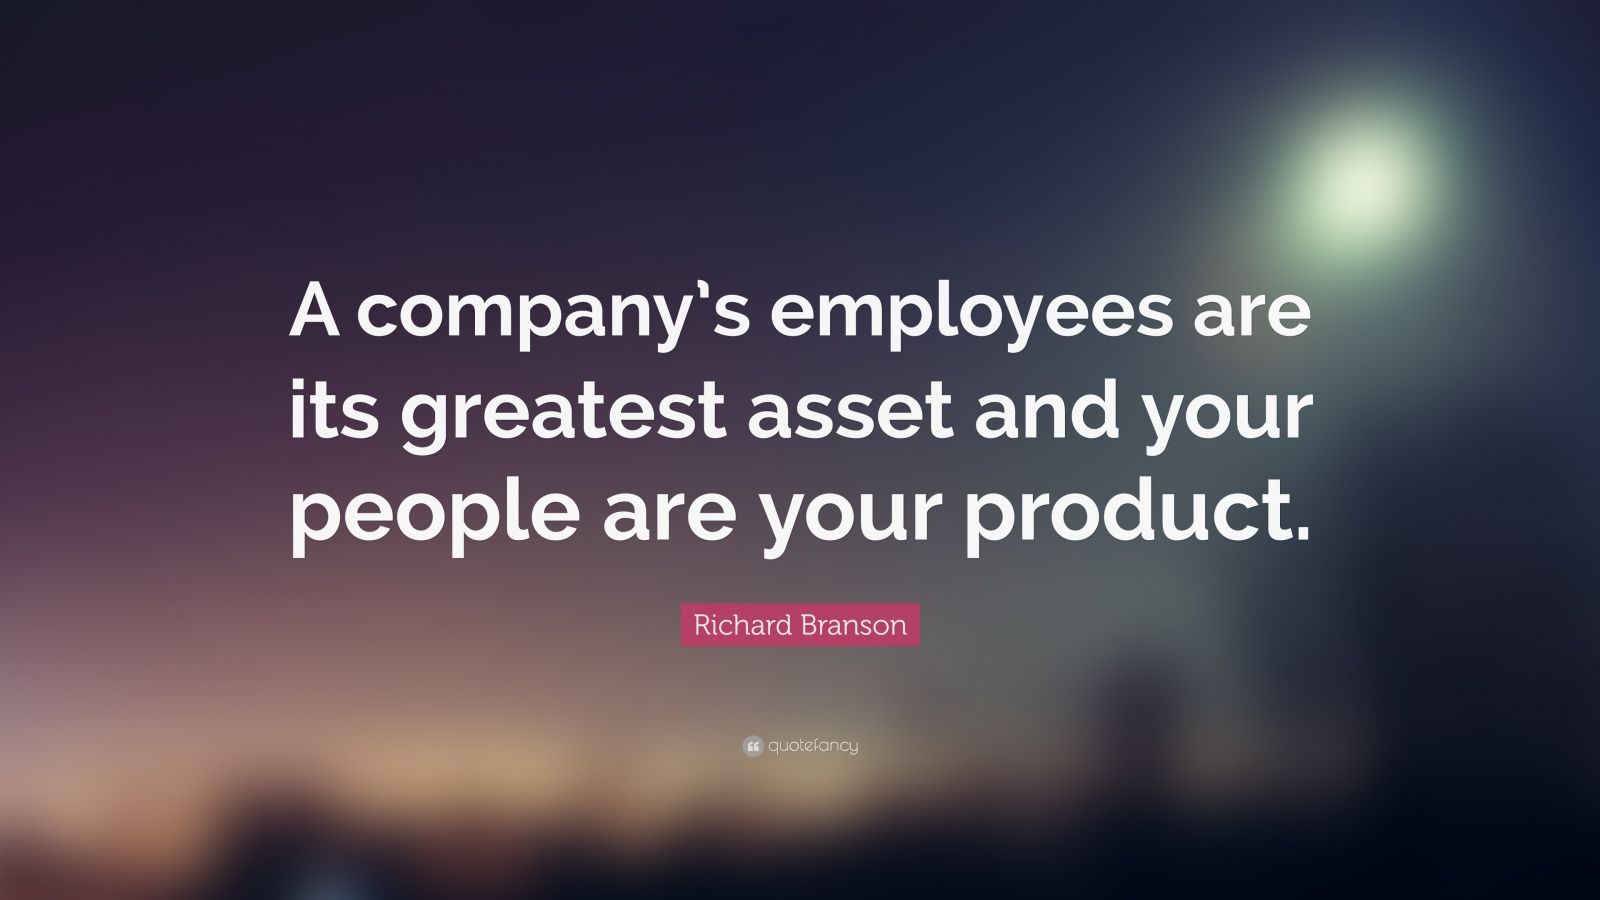 Richard Branson Quote: “A company’s employees are its greatest asset